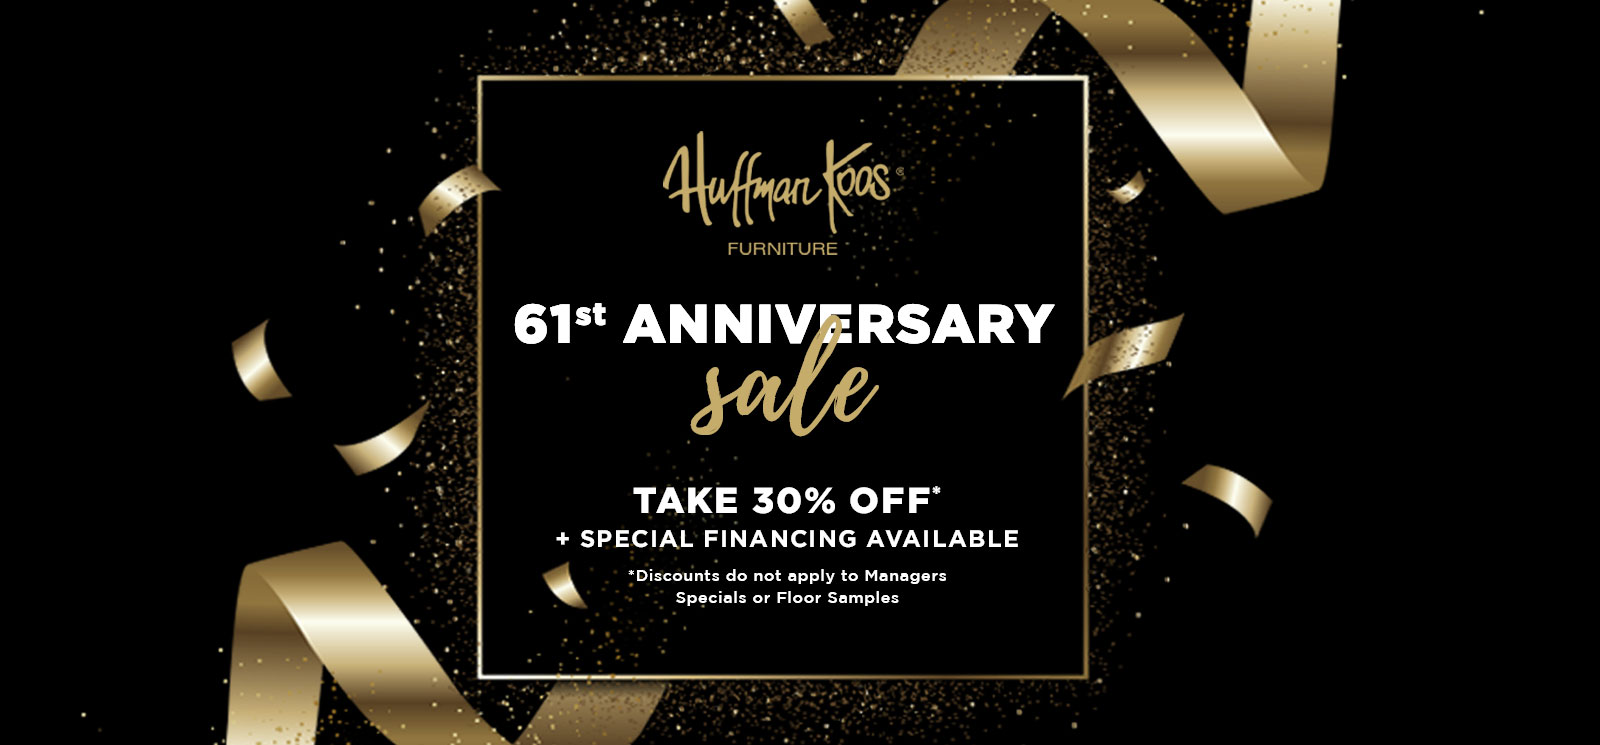 61st Anniversary Sale! Take 30% off + Special Financing Available